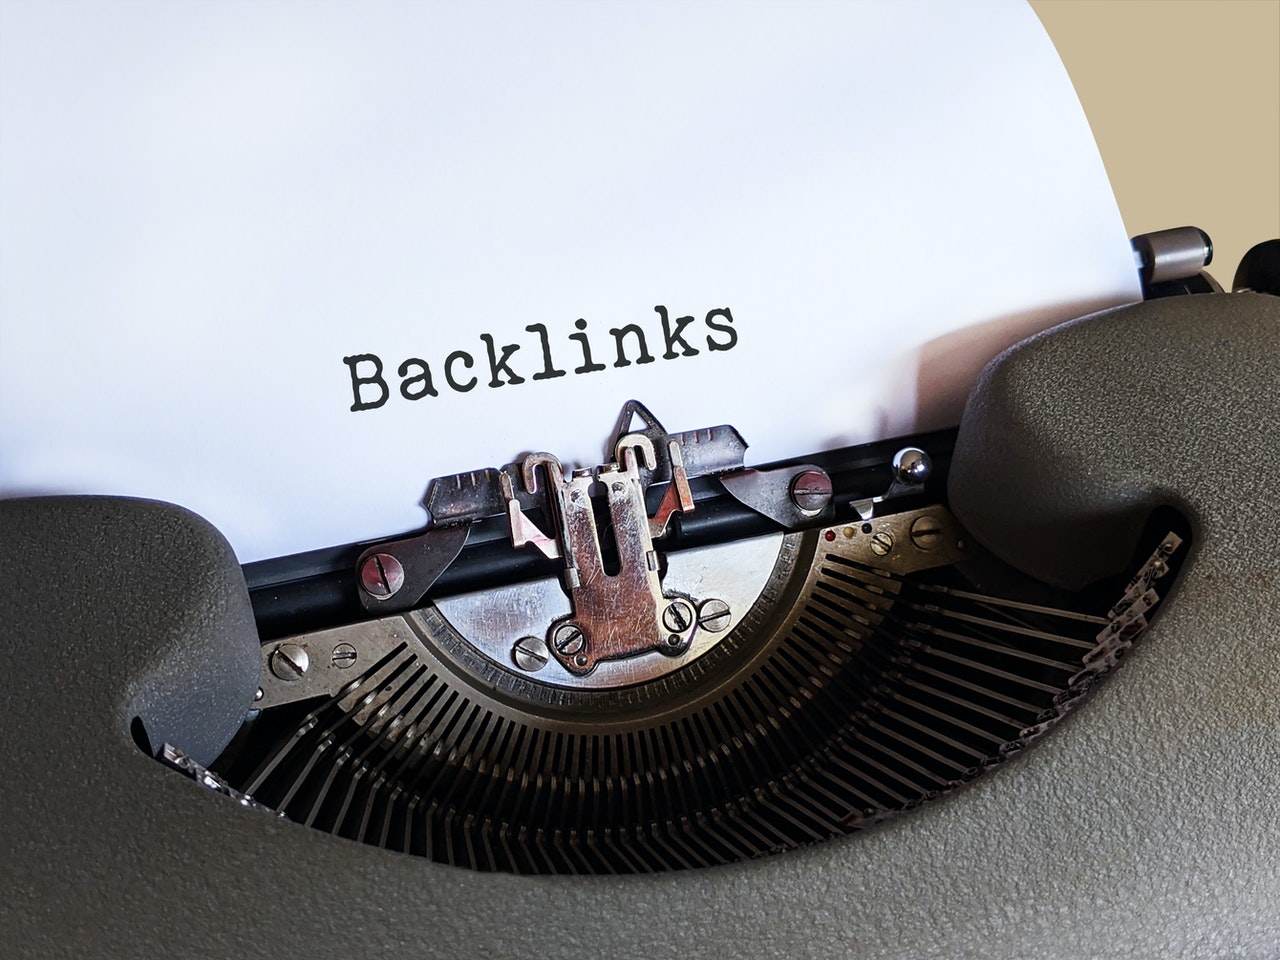 How I Use The Competitor Backlinks Link Building Strategy To Secure Over 20 Backlinks Each Week